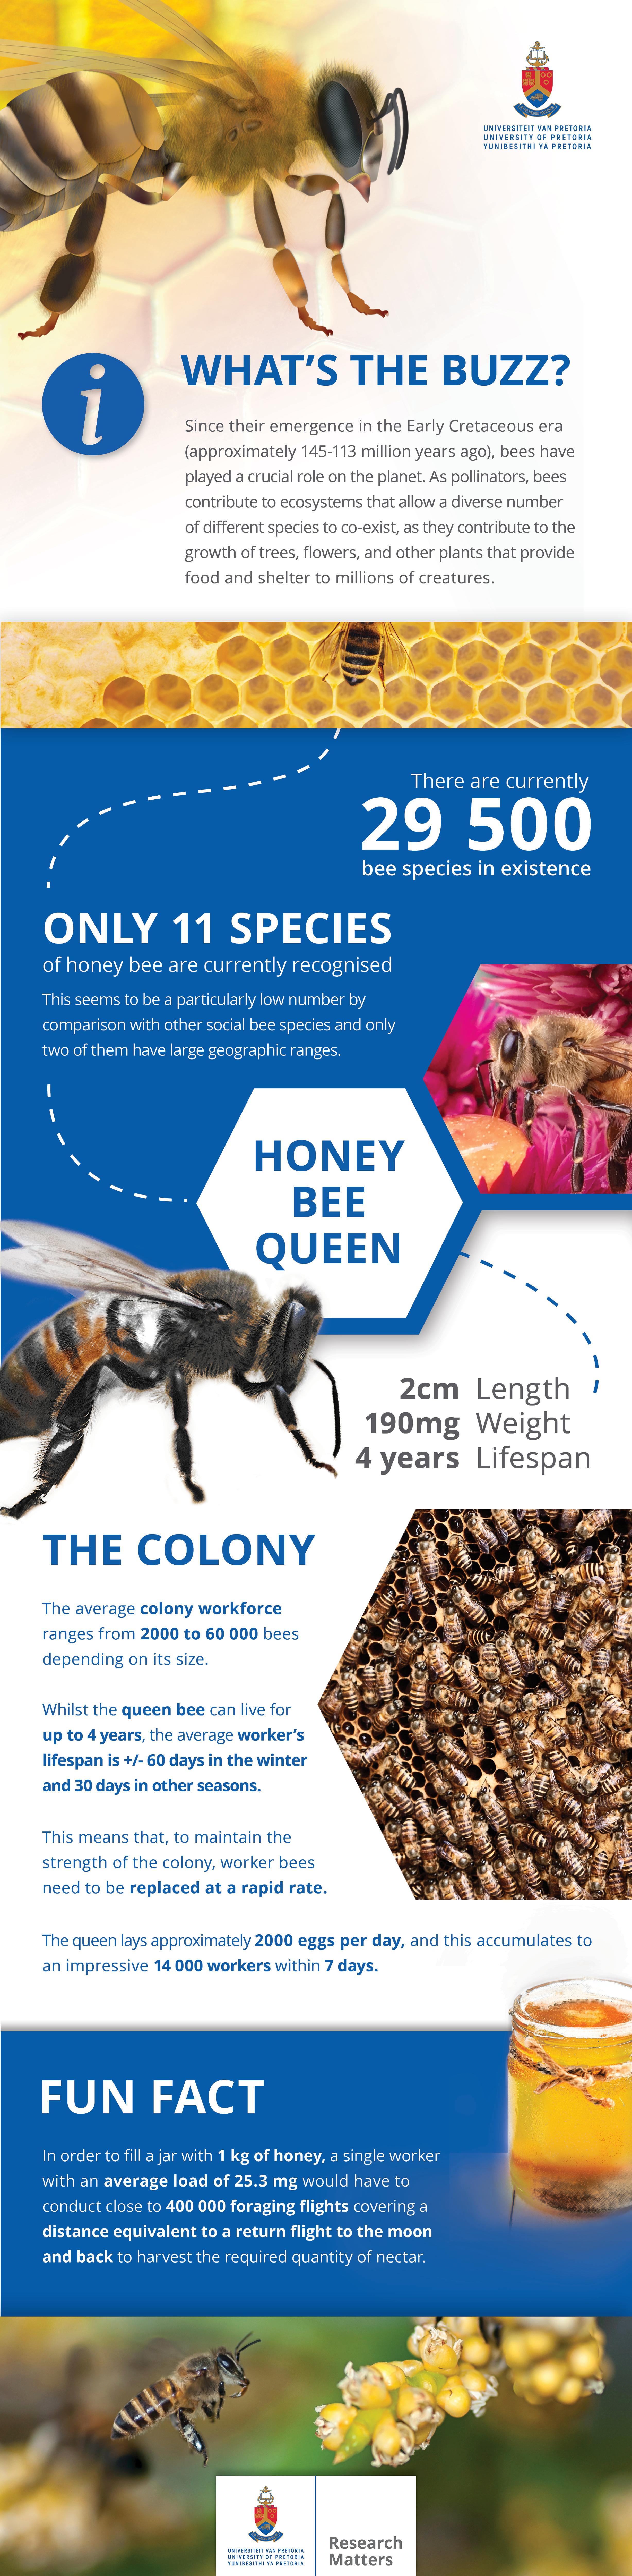 infographic about bees